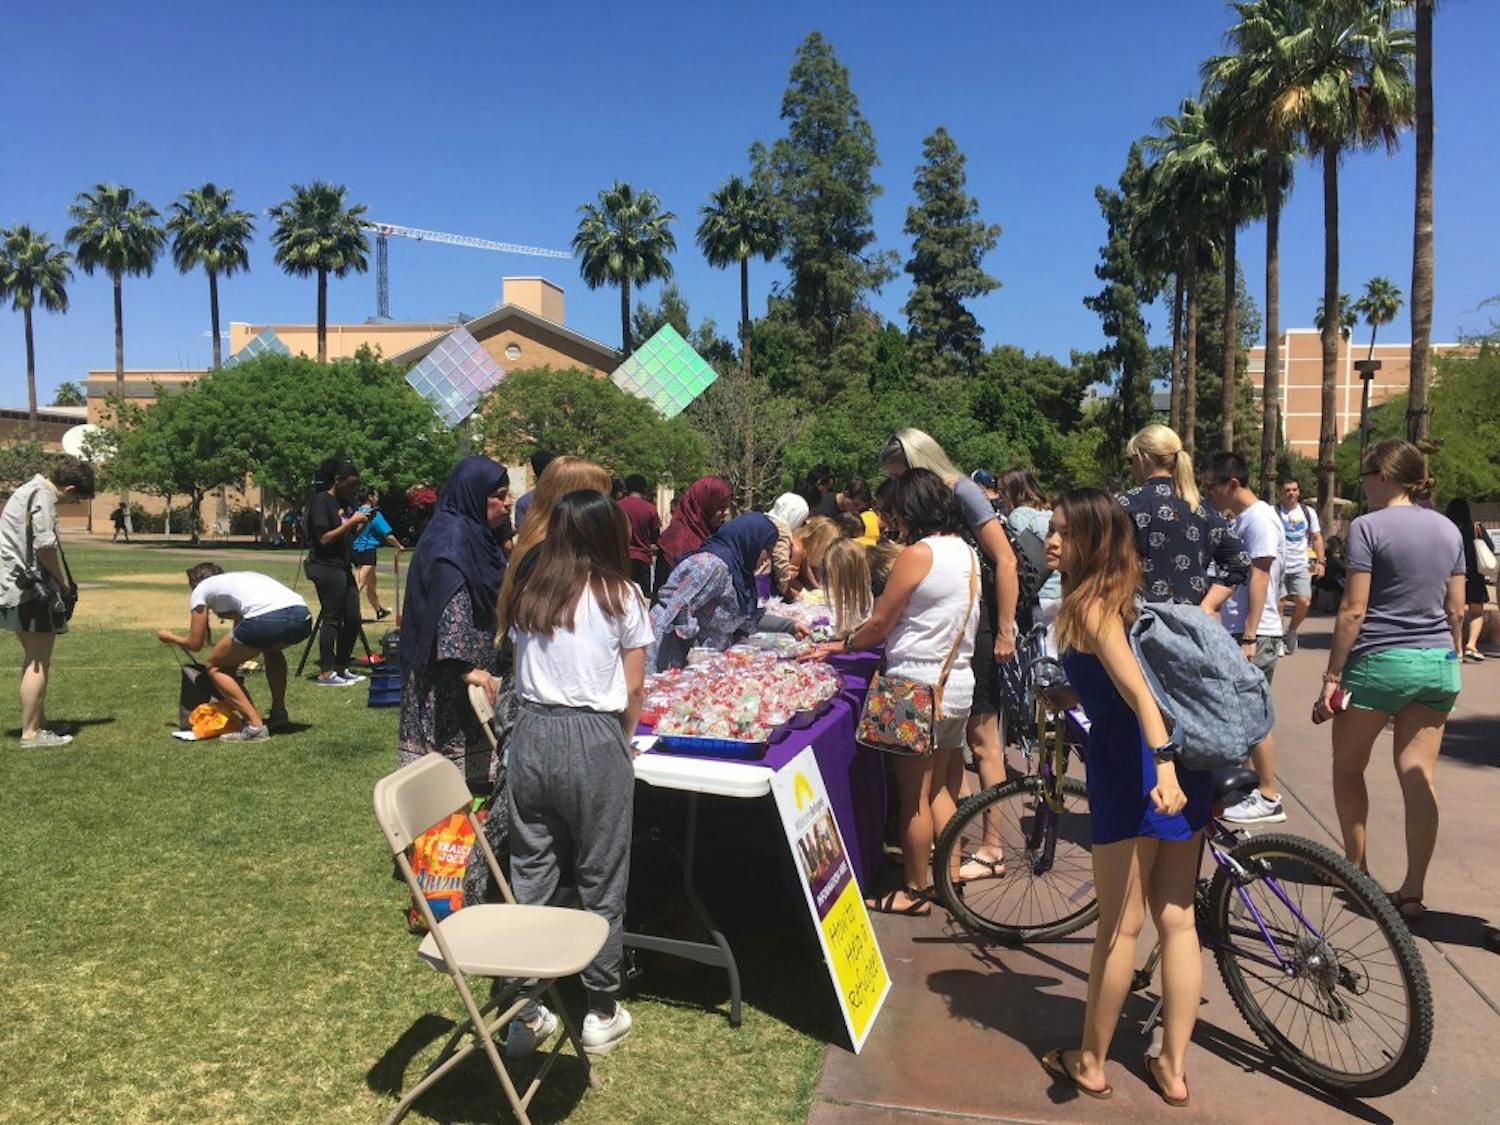 Refugees and Refugee Alliance club members sell a variety of Syrian pastries to students on the Hayden Lawn at ASU's Tempe campus&nbsp;on April 18, 2017 as part of their continual outreach to the refugee community.&nbsp;